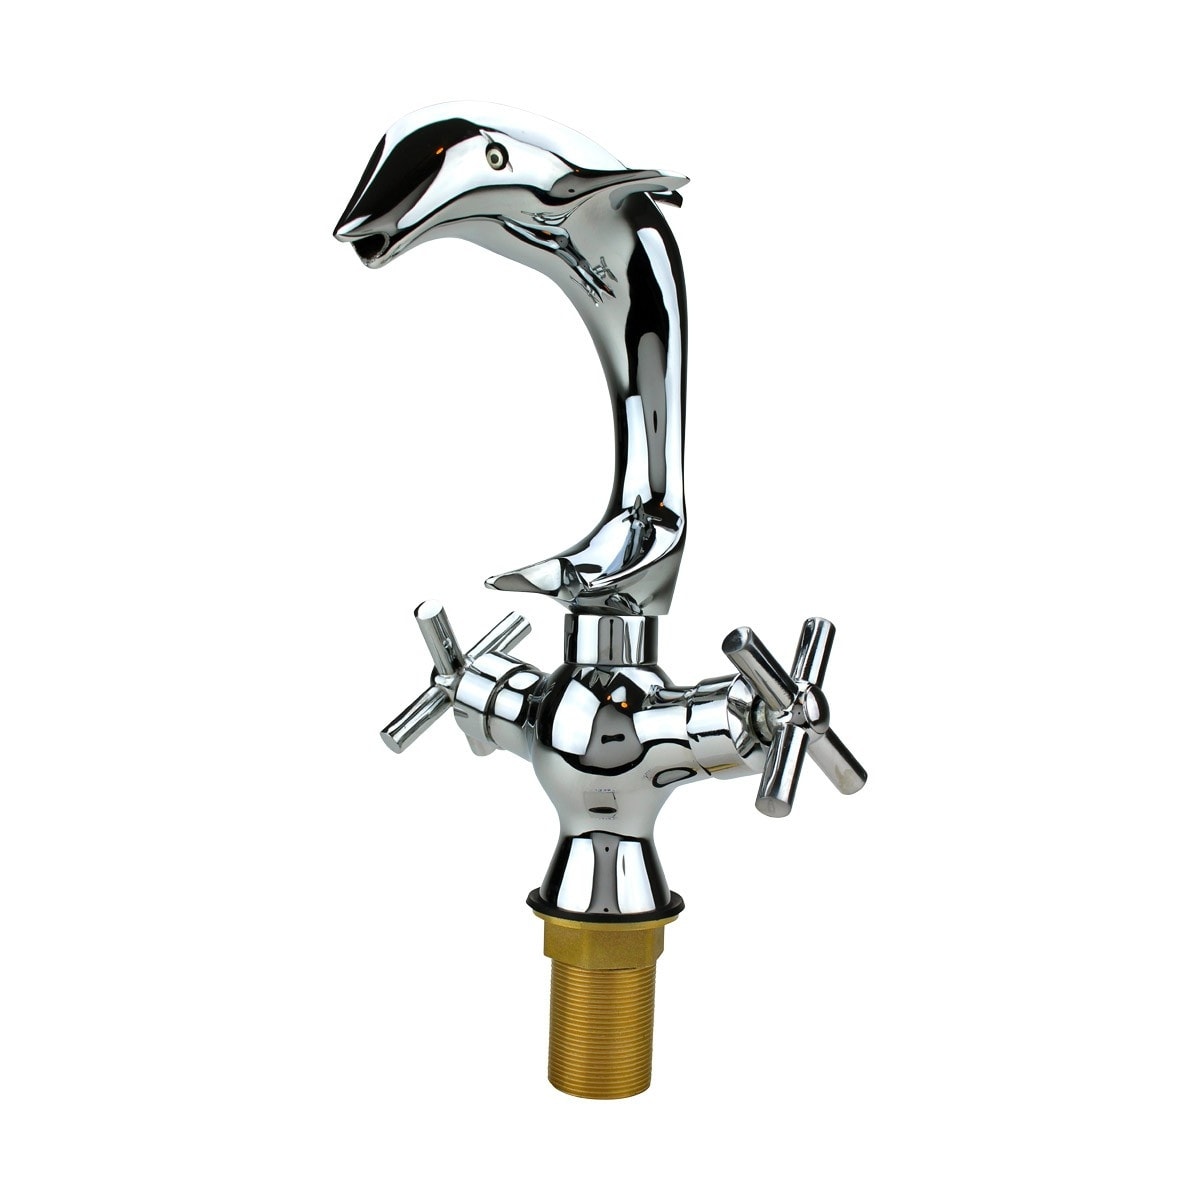 Dolphin Sink Faucet Lever handle Chrome Finish Free Shipping Drain Included 